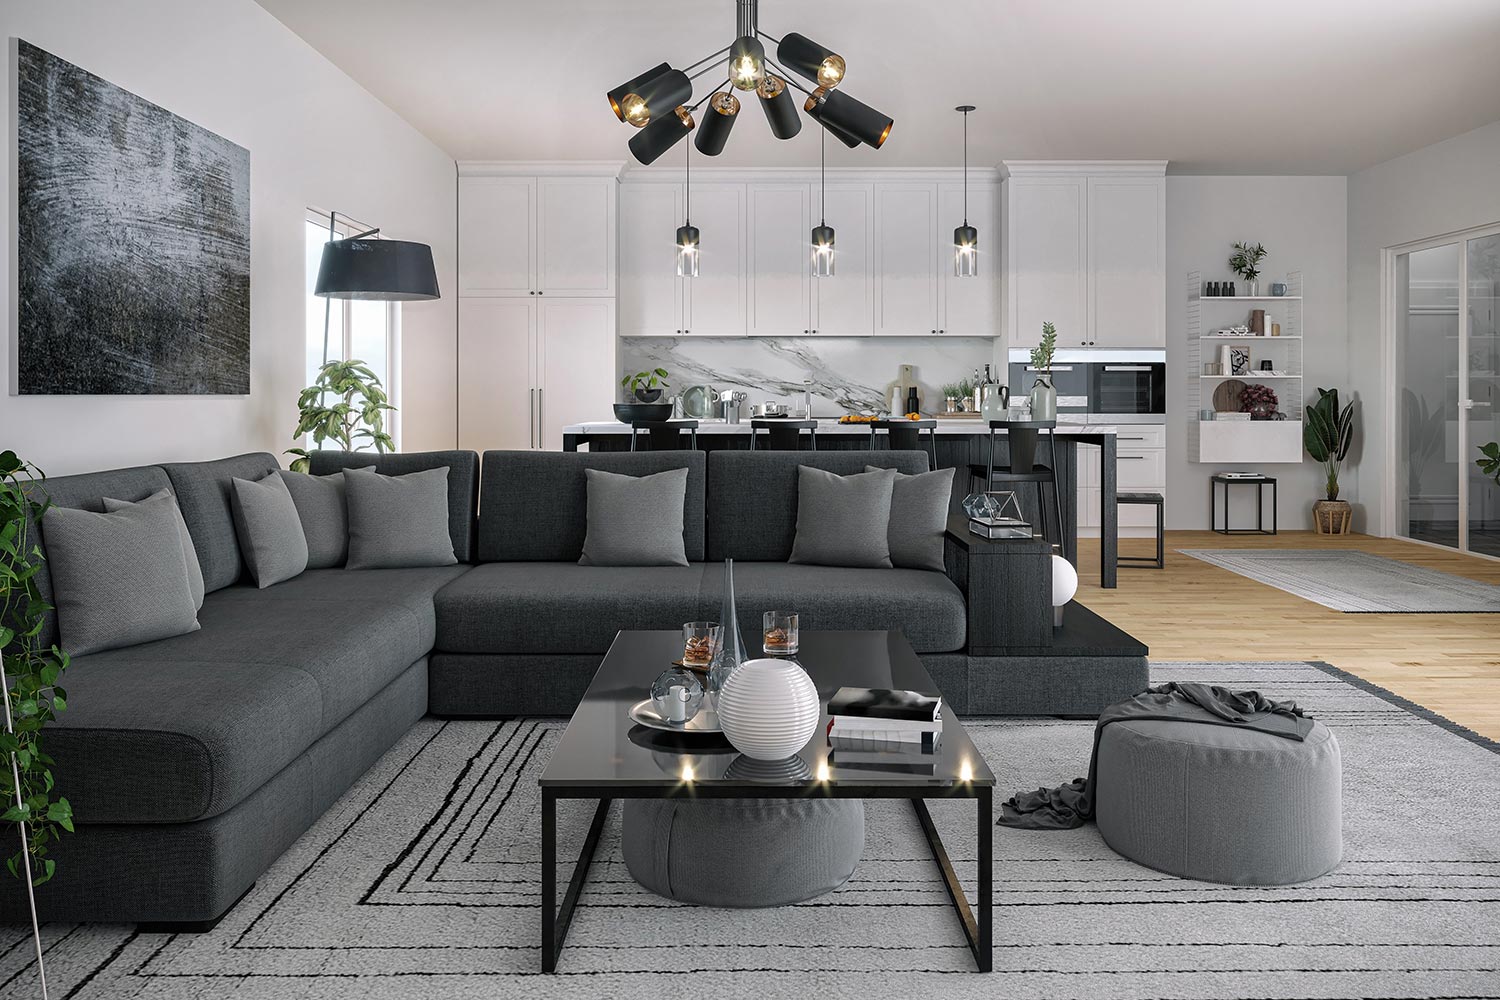 Modern living and kitchen area. White walls and light wooden flooring in kitchen area contrasting with dark gray couch, dark gray throw pillows, black glass coffee table and gray rug